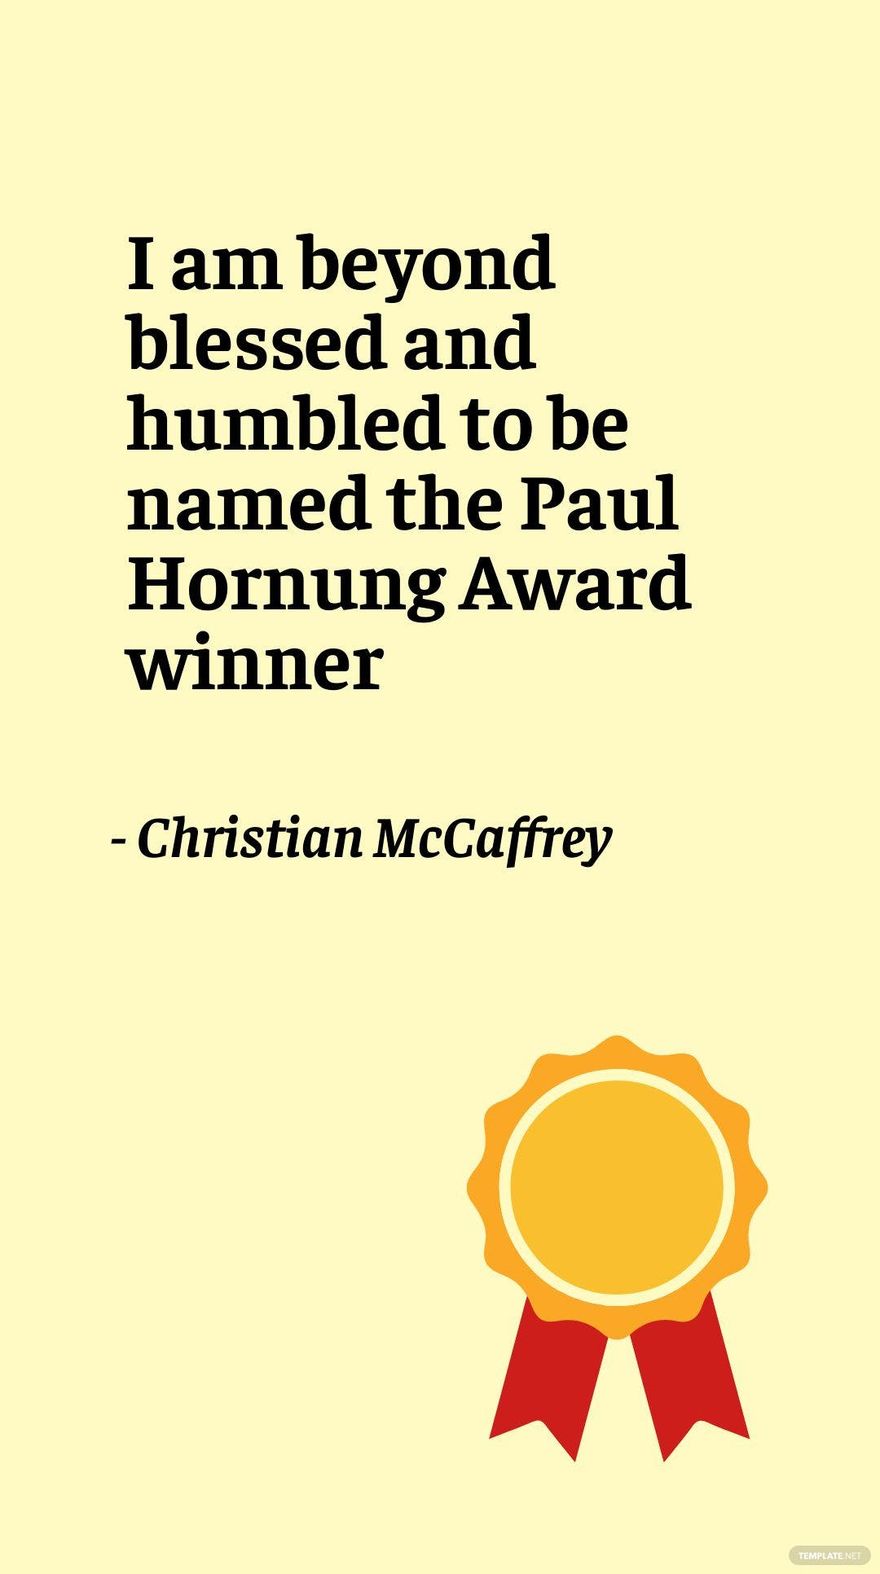 Christian McCaffrey - I am beyond blessed and humbled to be named the Paul Hornung Award winner